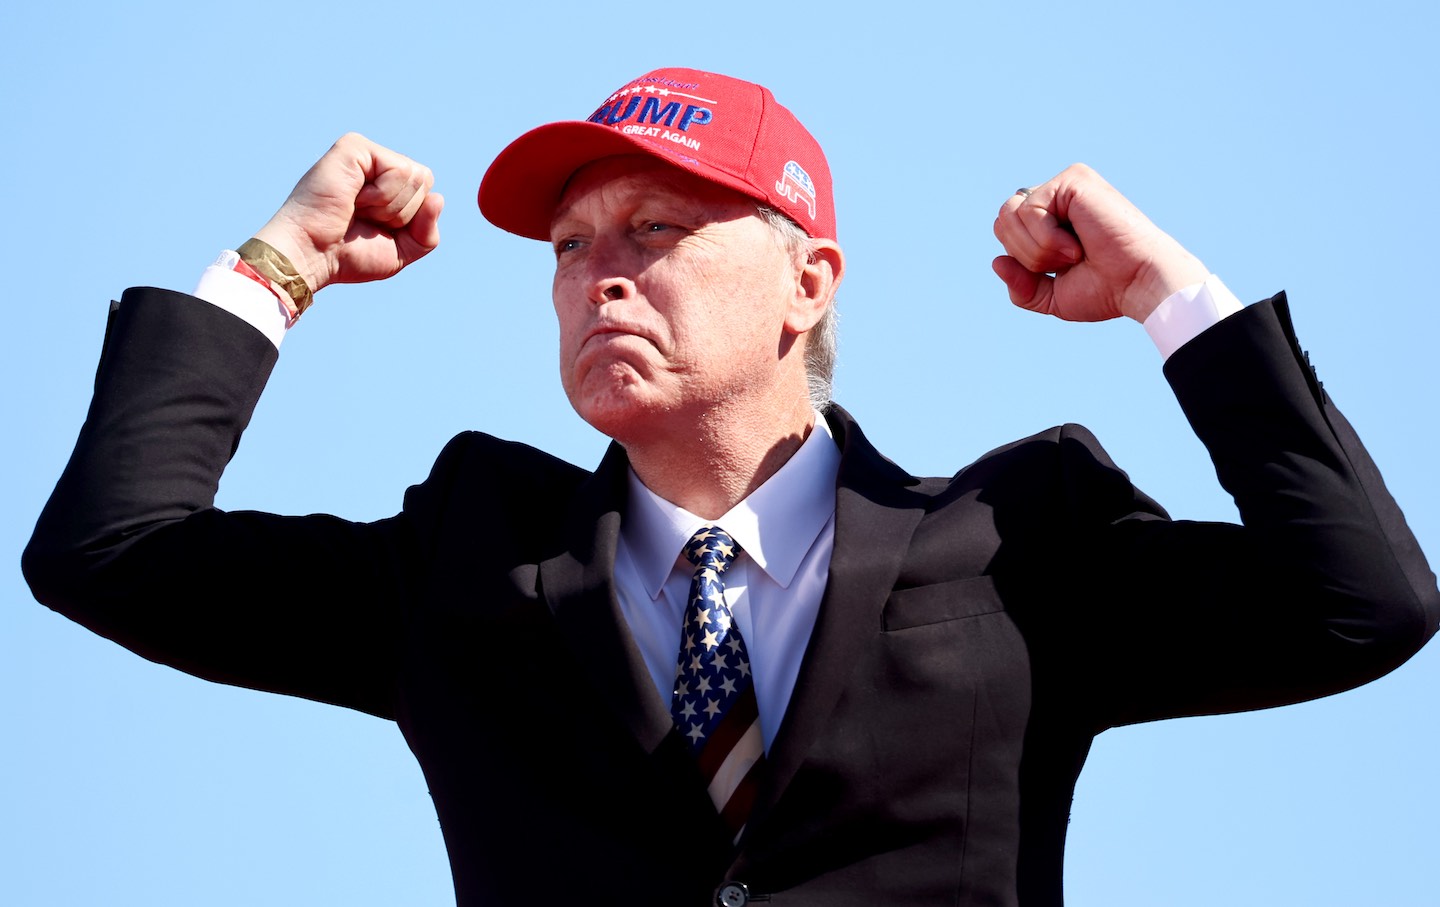 Representative Andy Biggs (R-Ariz.) strikes a pose at a campaign rally attended by former president Donald Trump at Legacy Sports USA on October 9, 2022 in Mesa, Ariz.